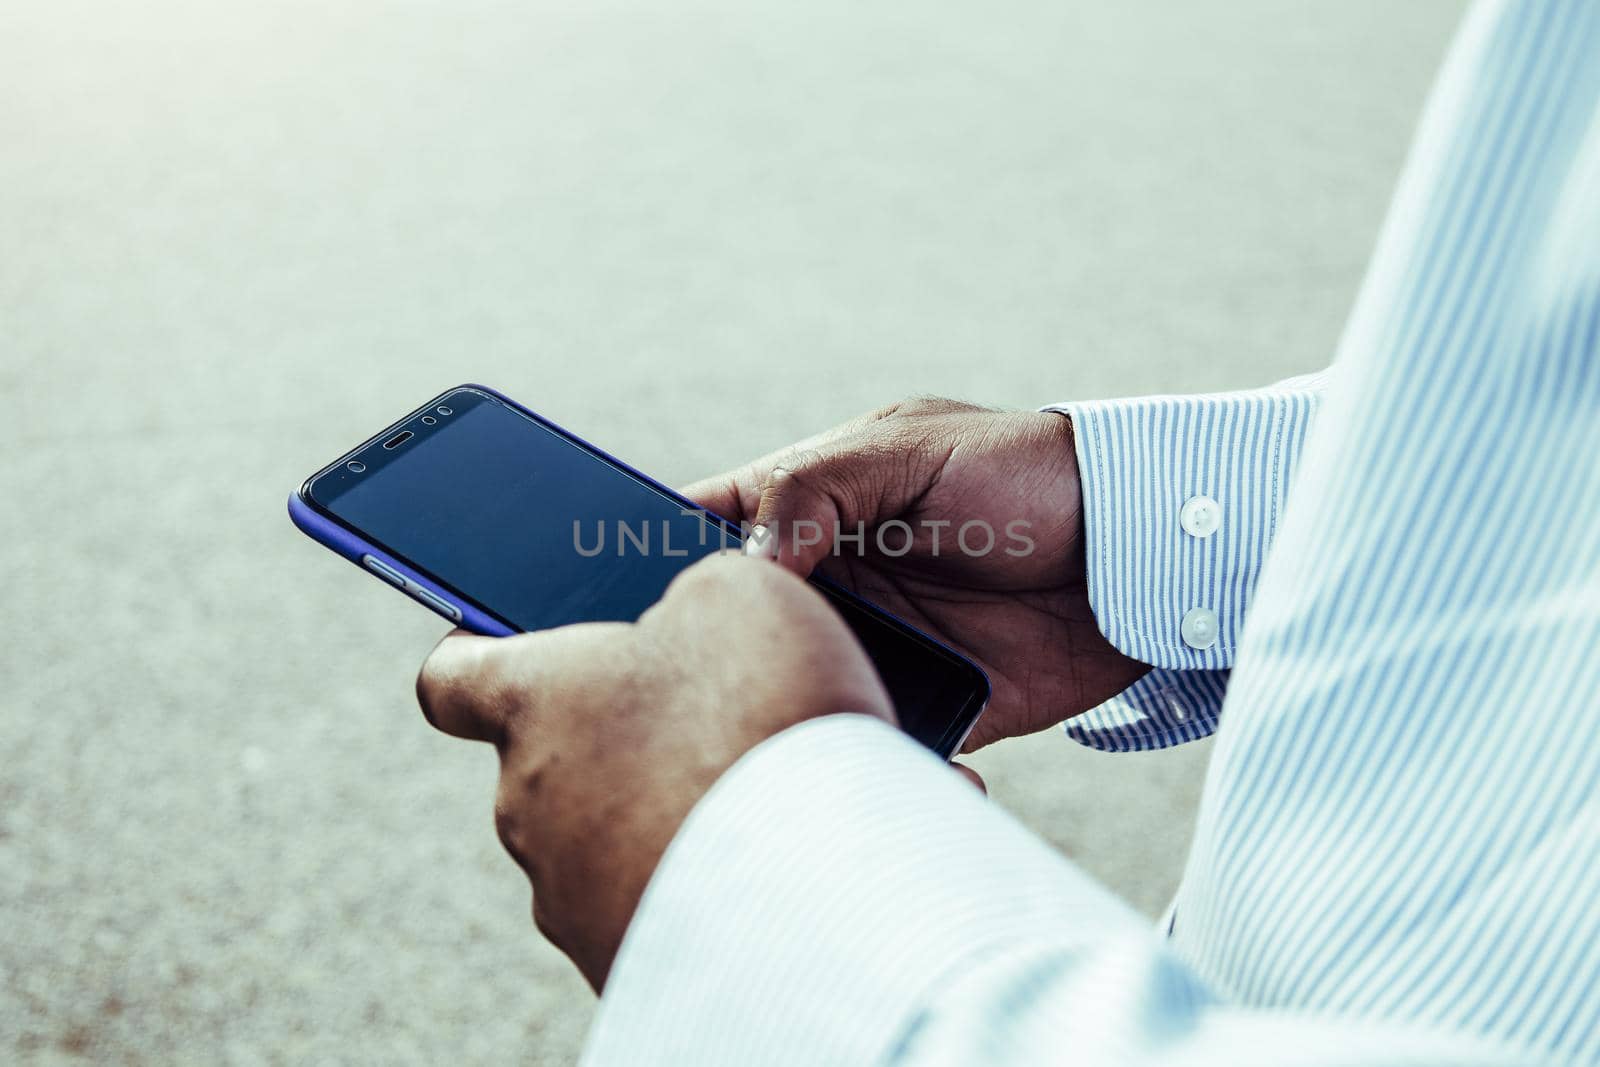 Very close-up view of dark skinned hands using mobile phone outdoors.